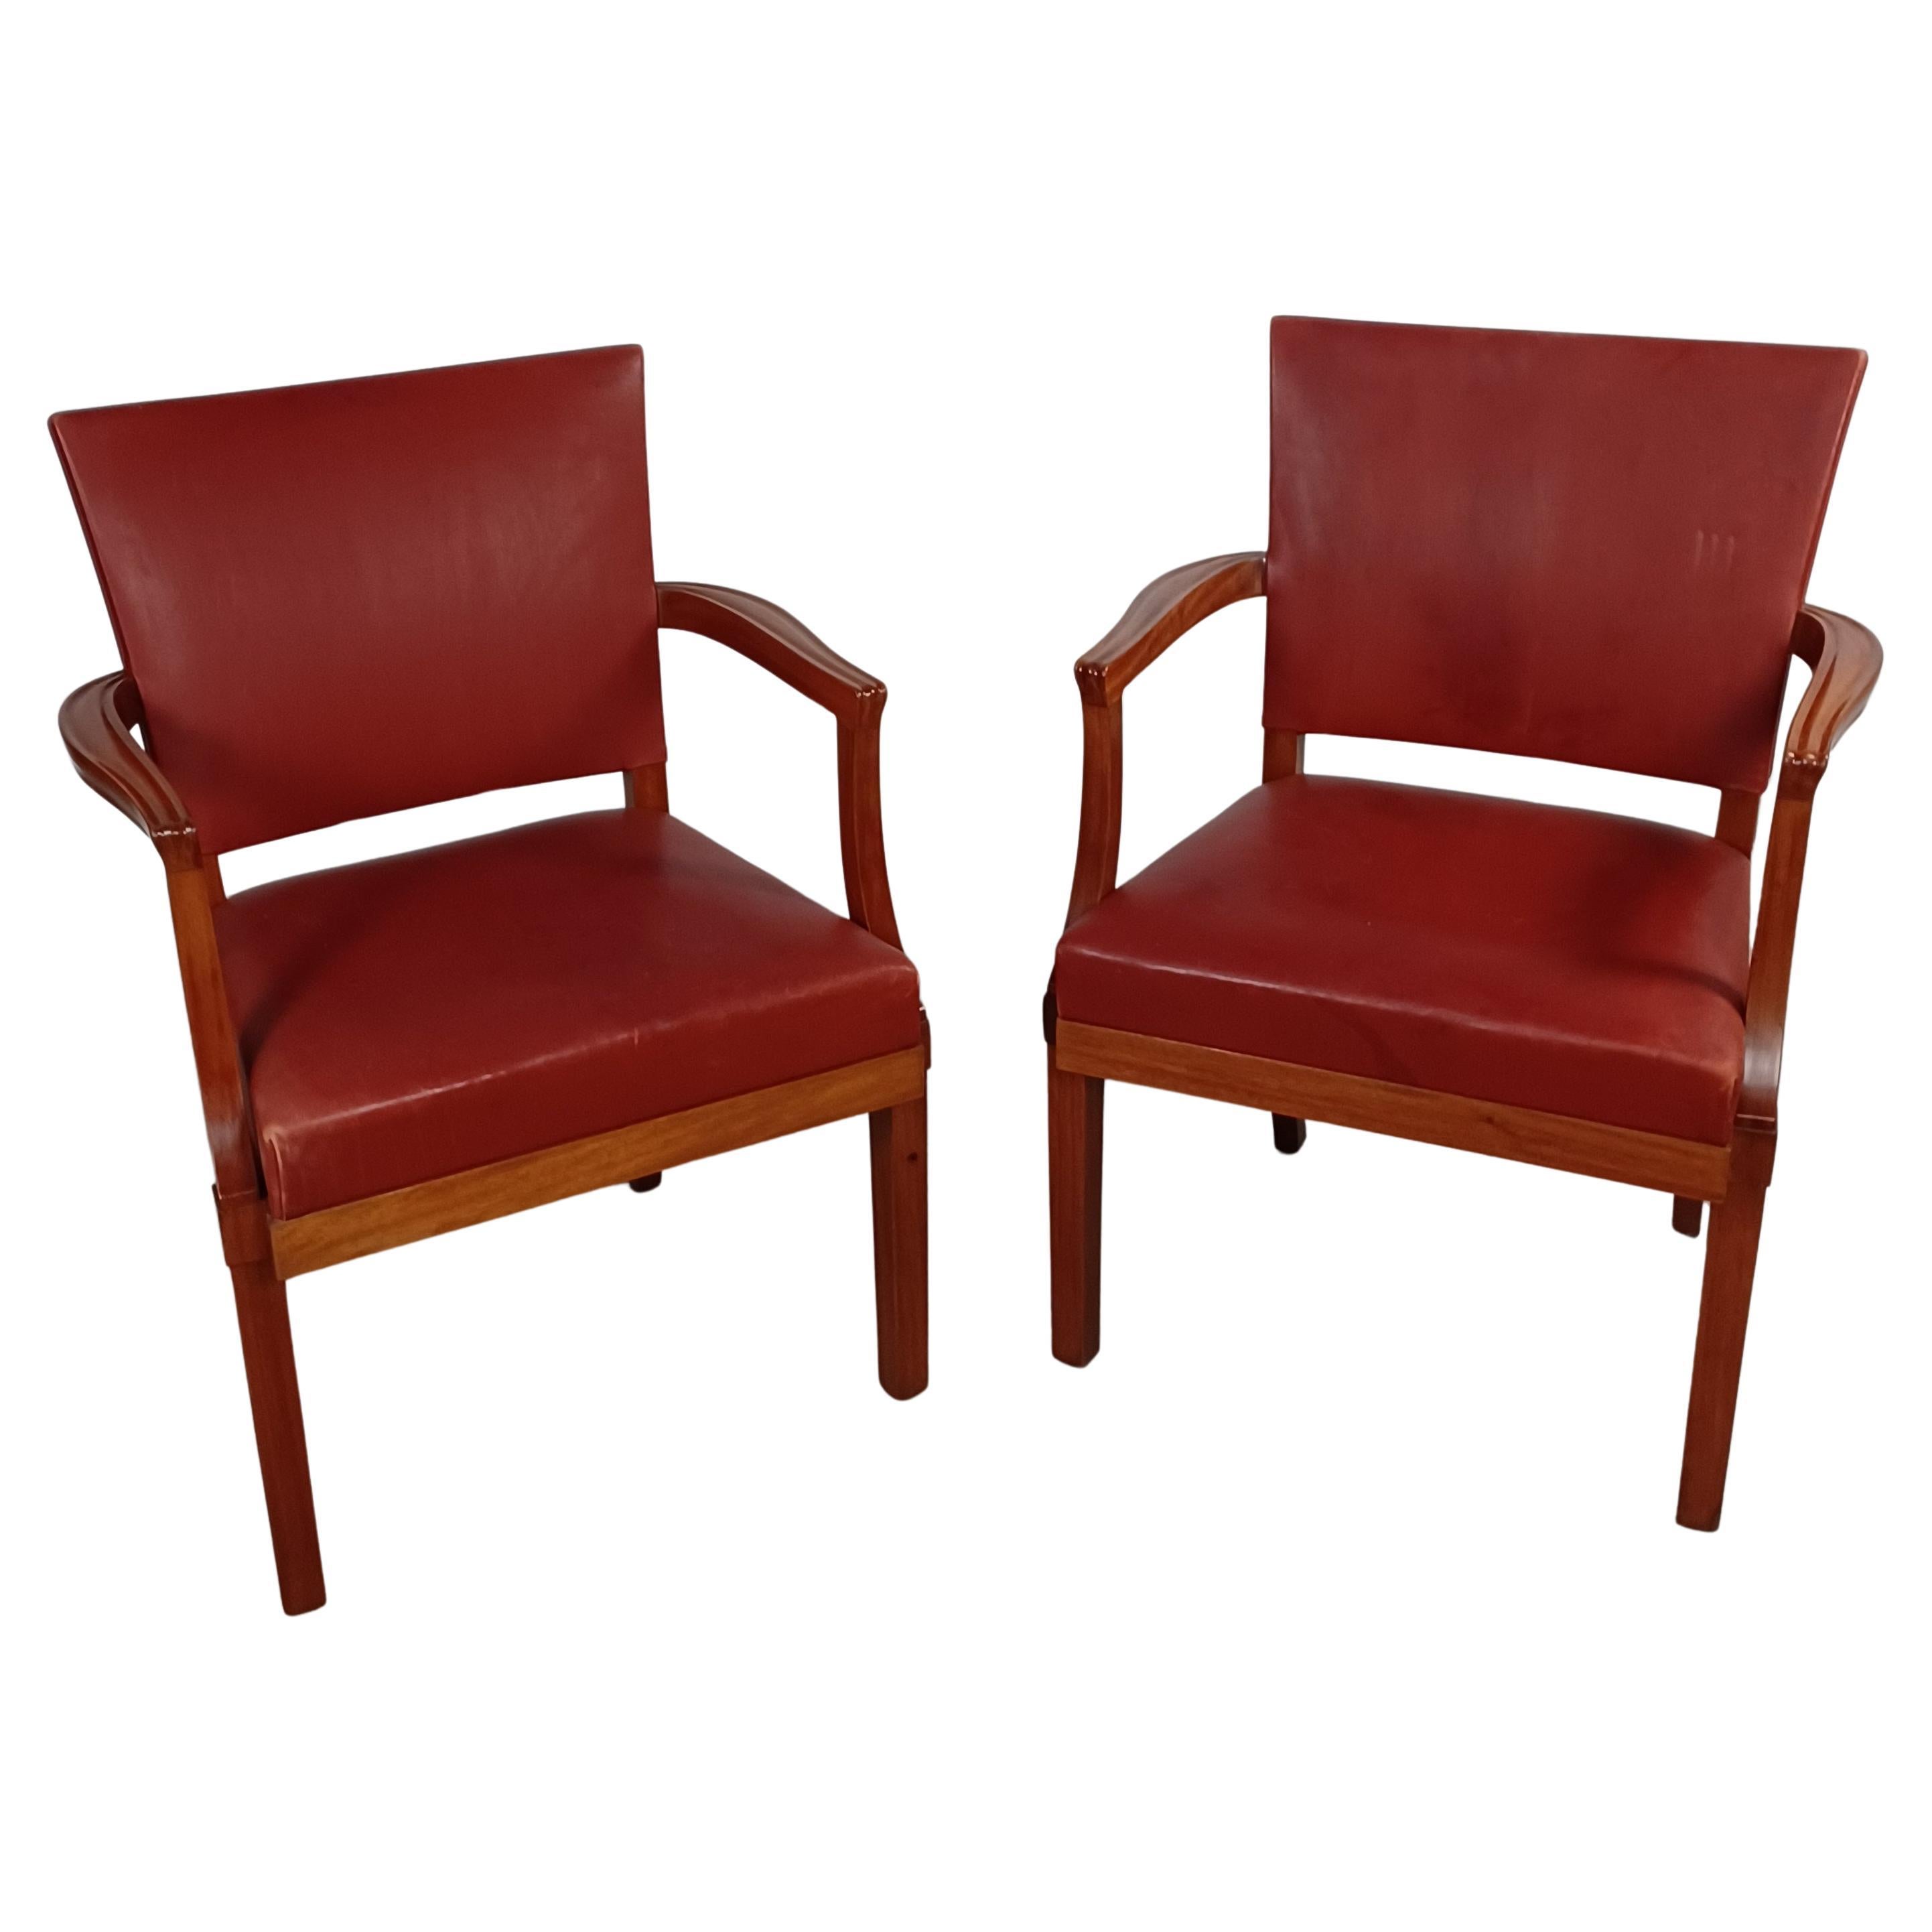 1935 Set of Two Restored Kaare Klint Barcelona or The Red Chair by Rud Rasmussen For Sale